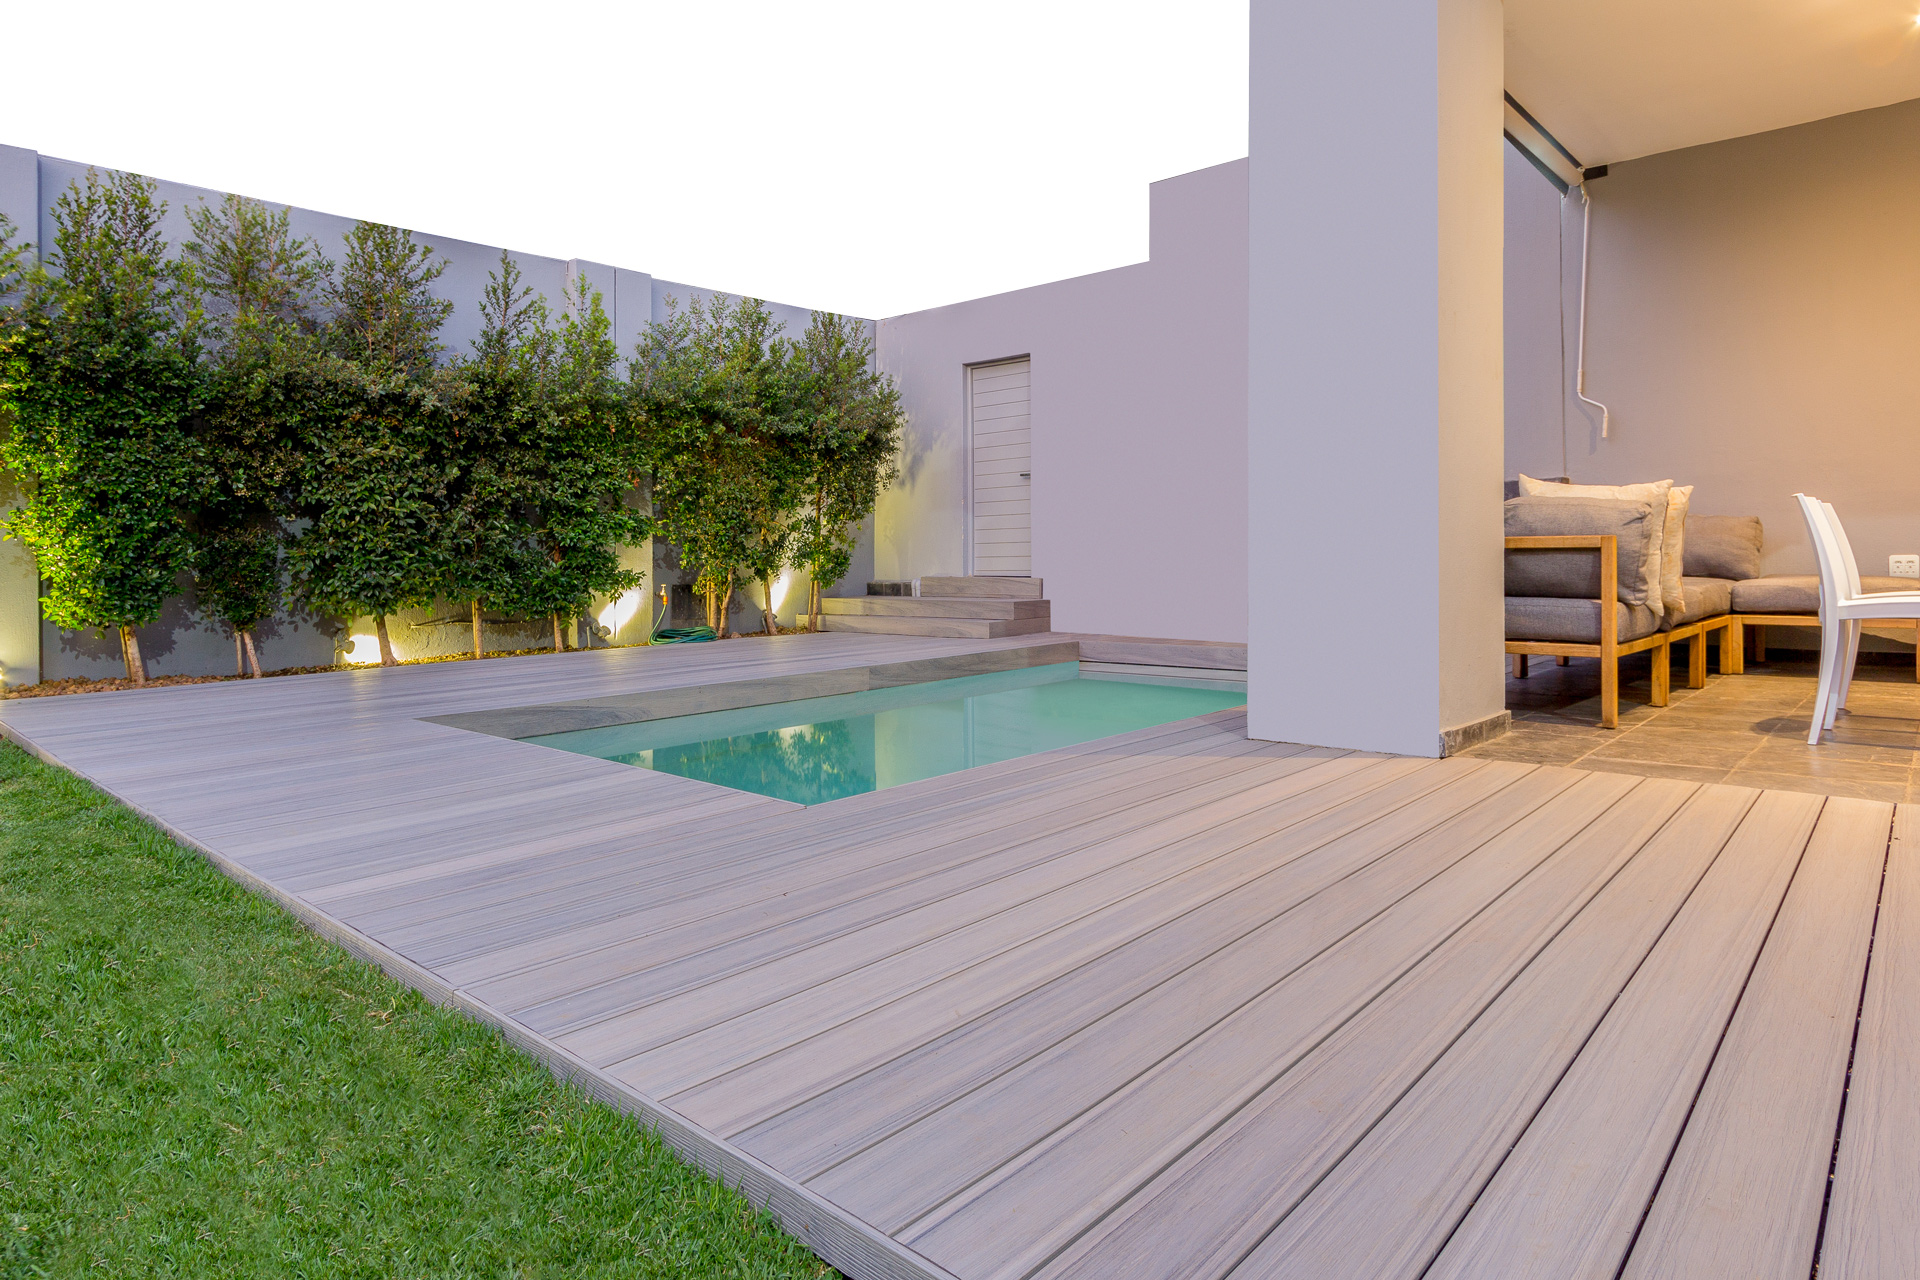 Composite decking next to a pool in a modern backyard with trees lining the exterior wall.